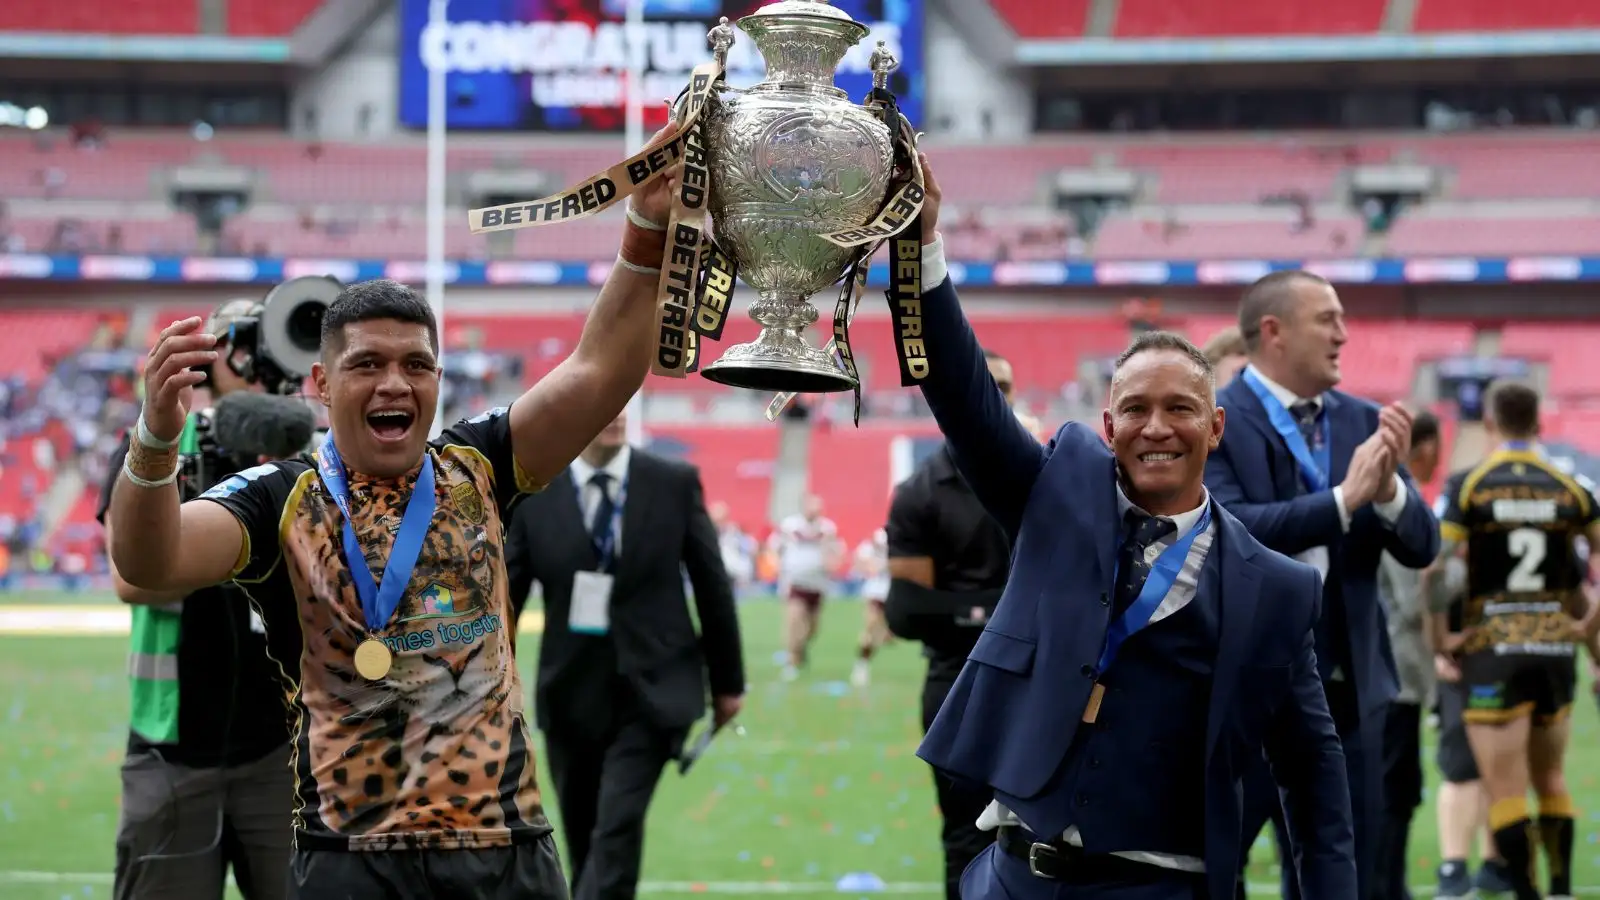 Adrian Lam backs Leigh Leopards to win more silverware after Challenge Cup triumph